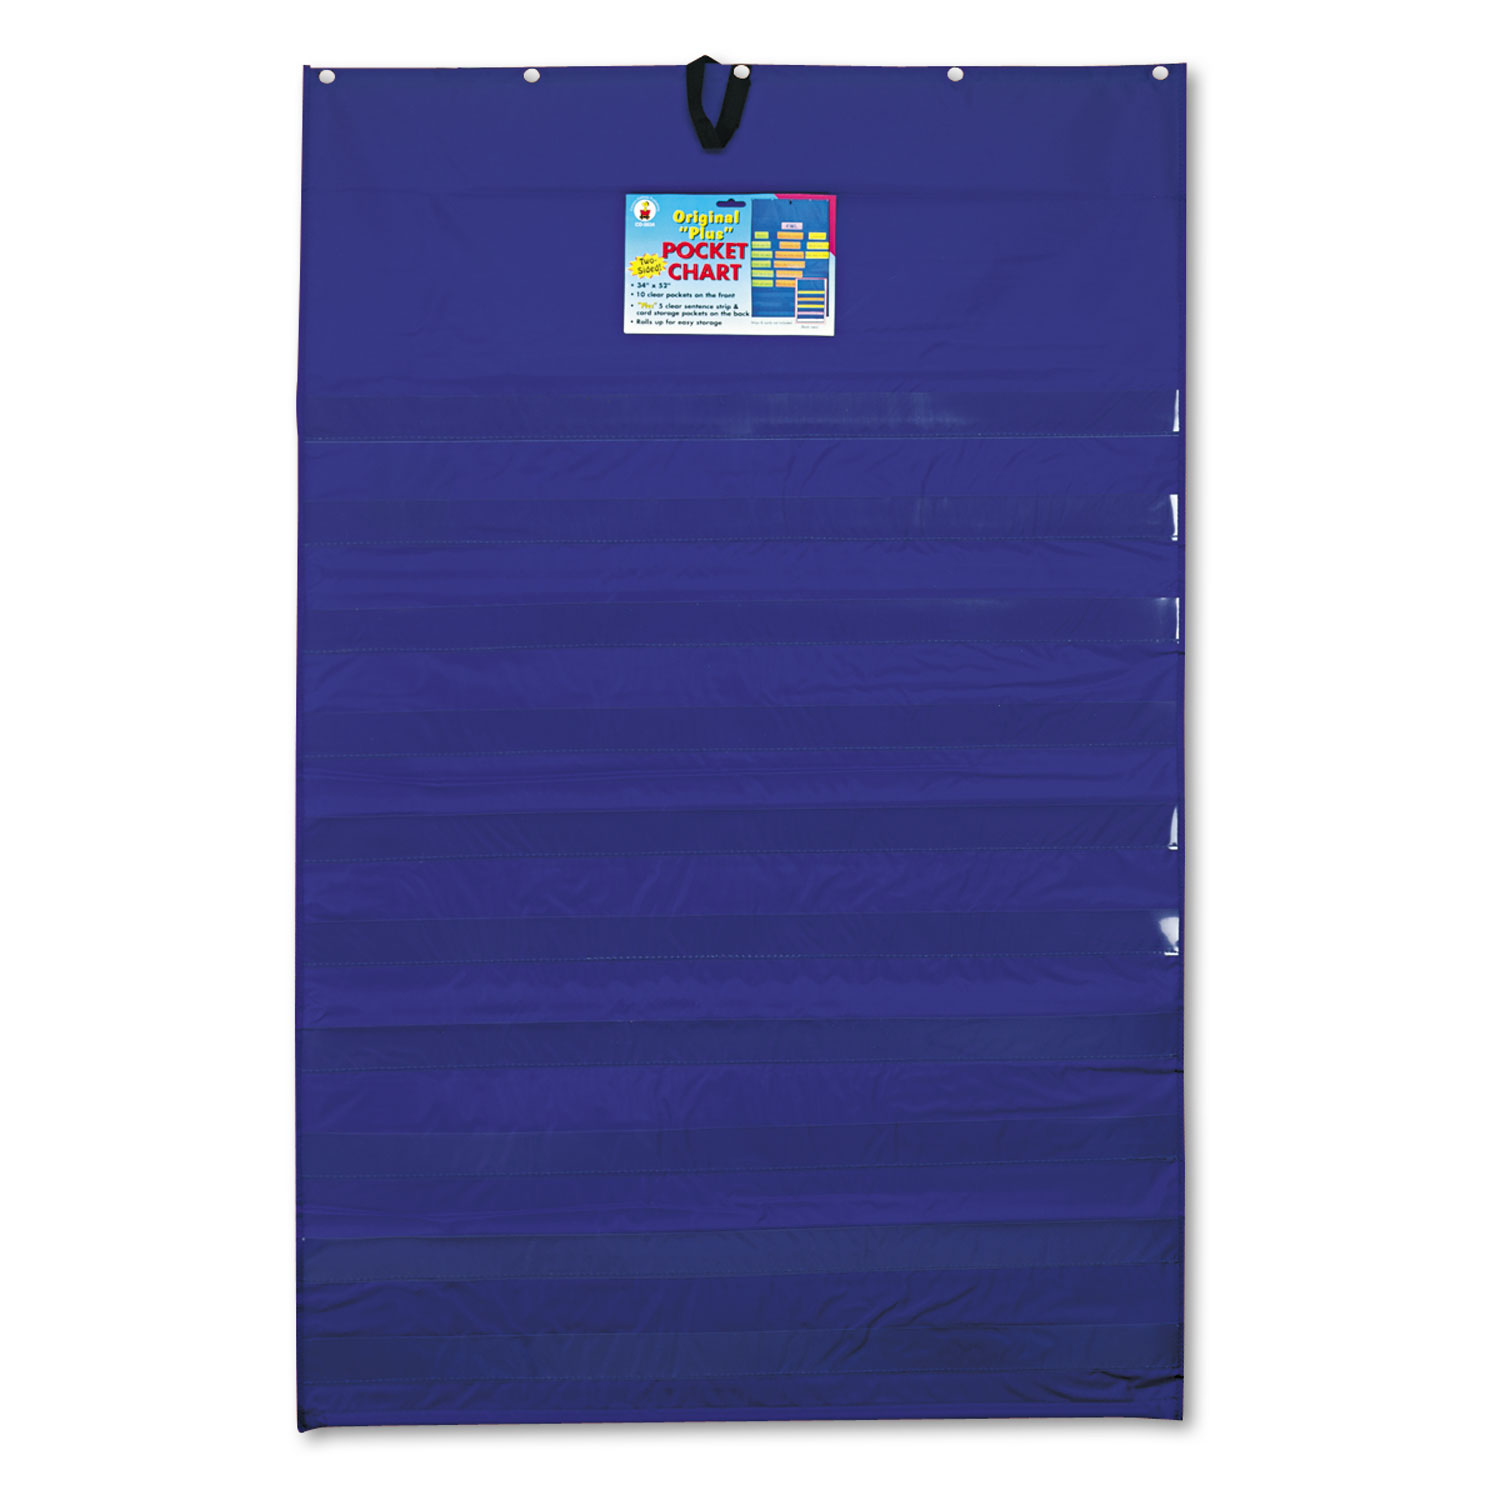 Original Plus 10-Pocket Chart with Five Clear Sentence Strips, Blue, 34 x 52